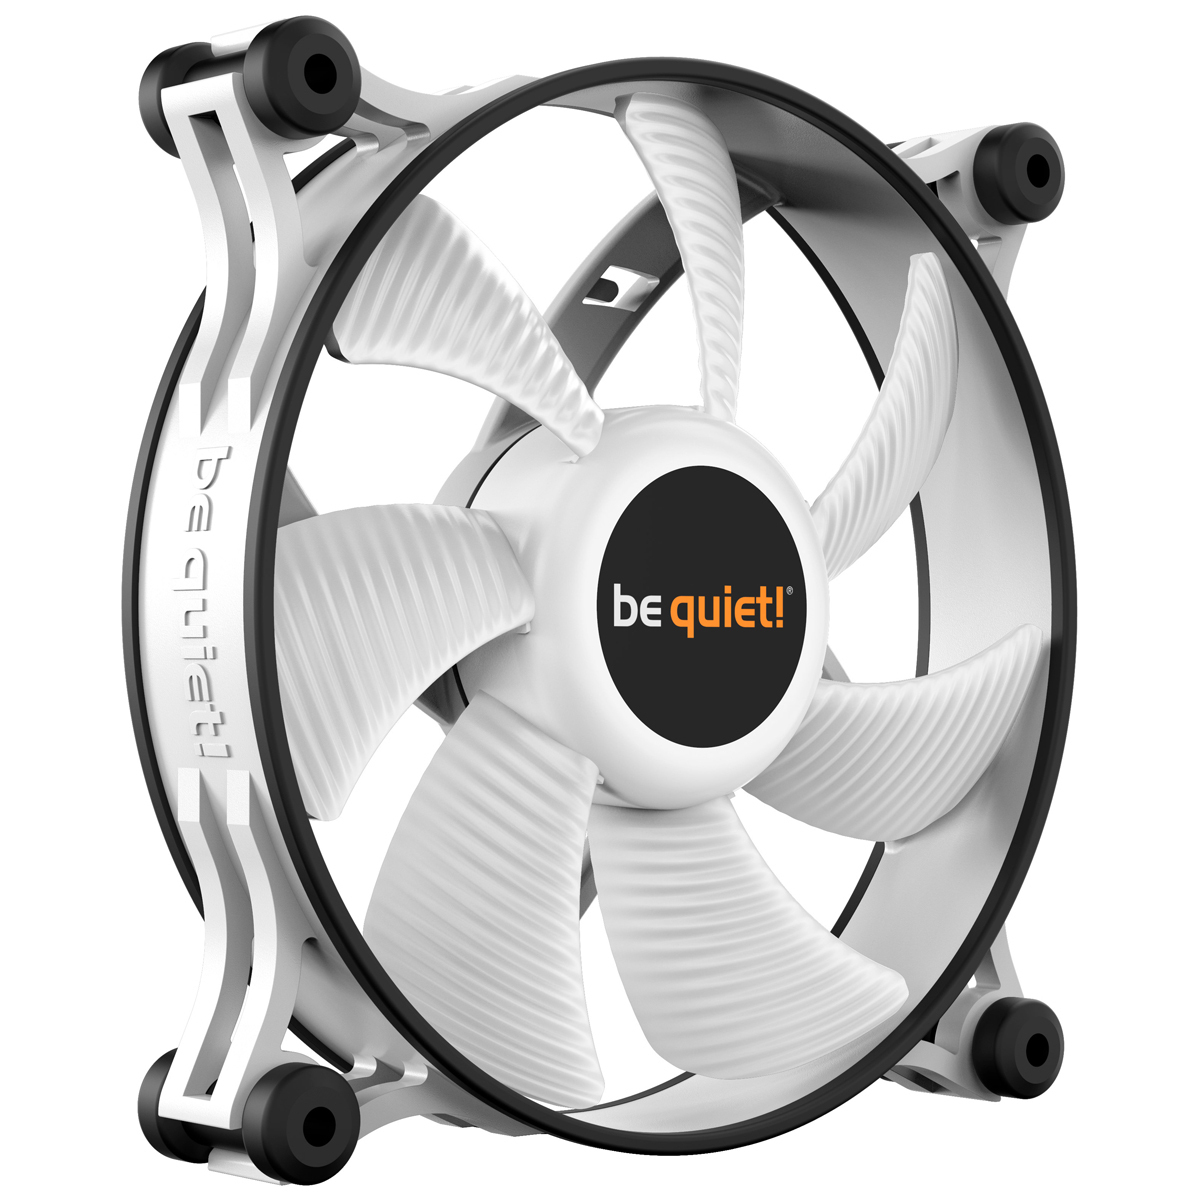 be quiet! SHADOW WINGS 2 WHITE | 120mm PWM Lüfter von be quiet!